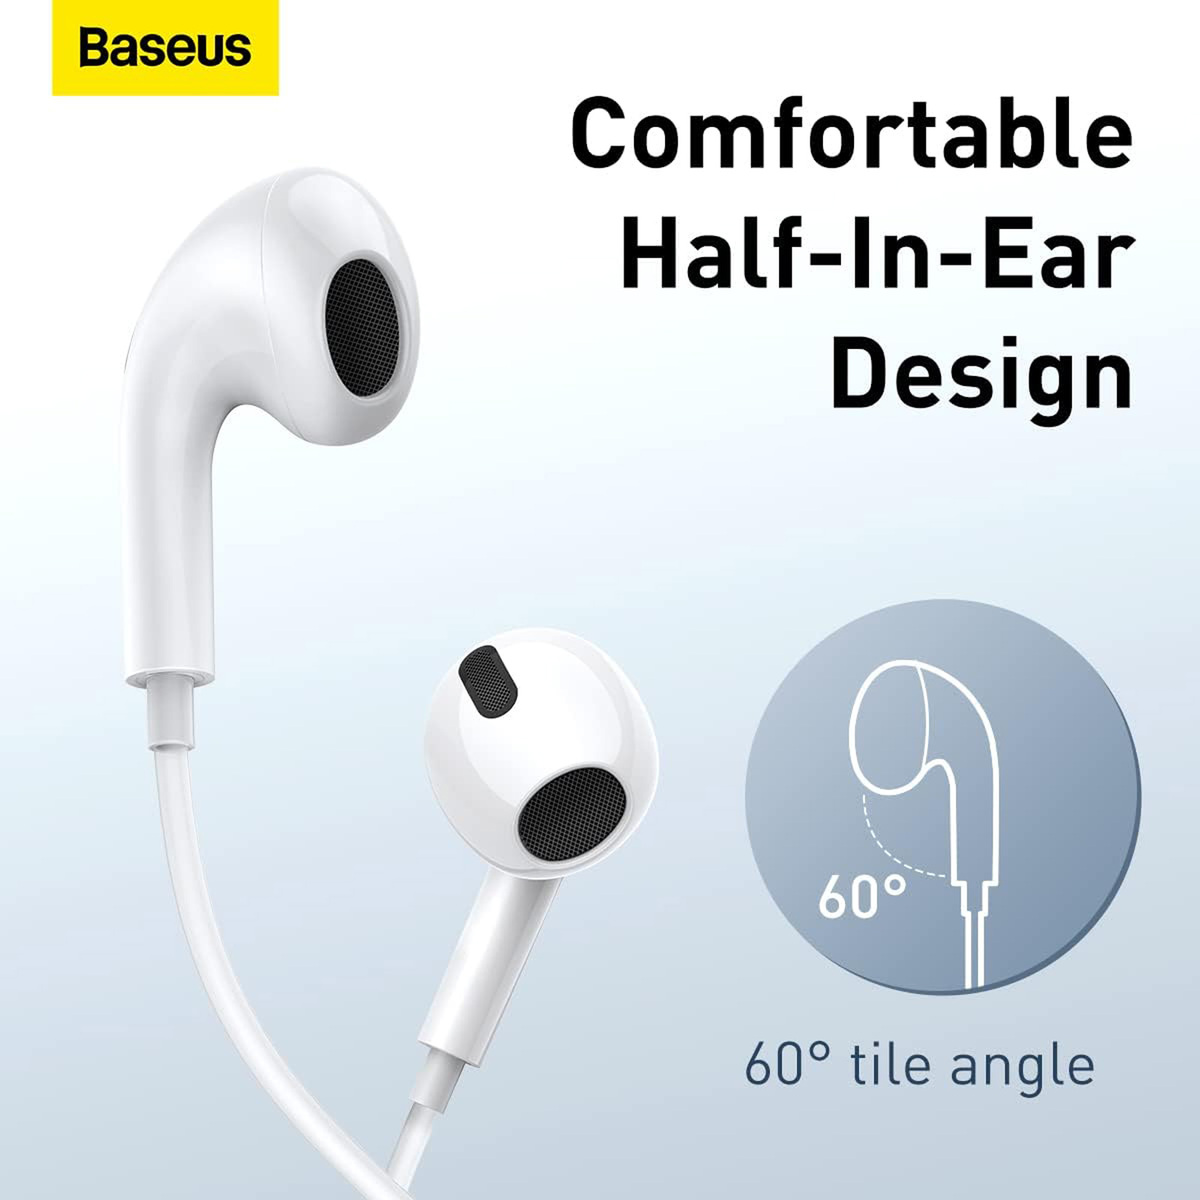 Baseus Wired Earphone in-ear 3.5mm Button Control Headphones Lightweight Headset Compatible with 3.5mm Port Devices NGCR020002